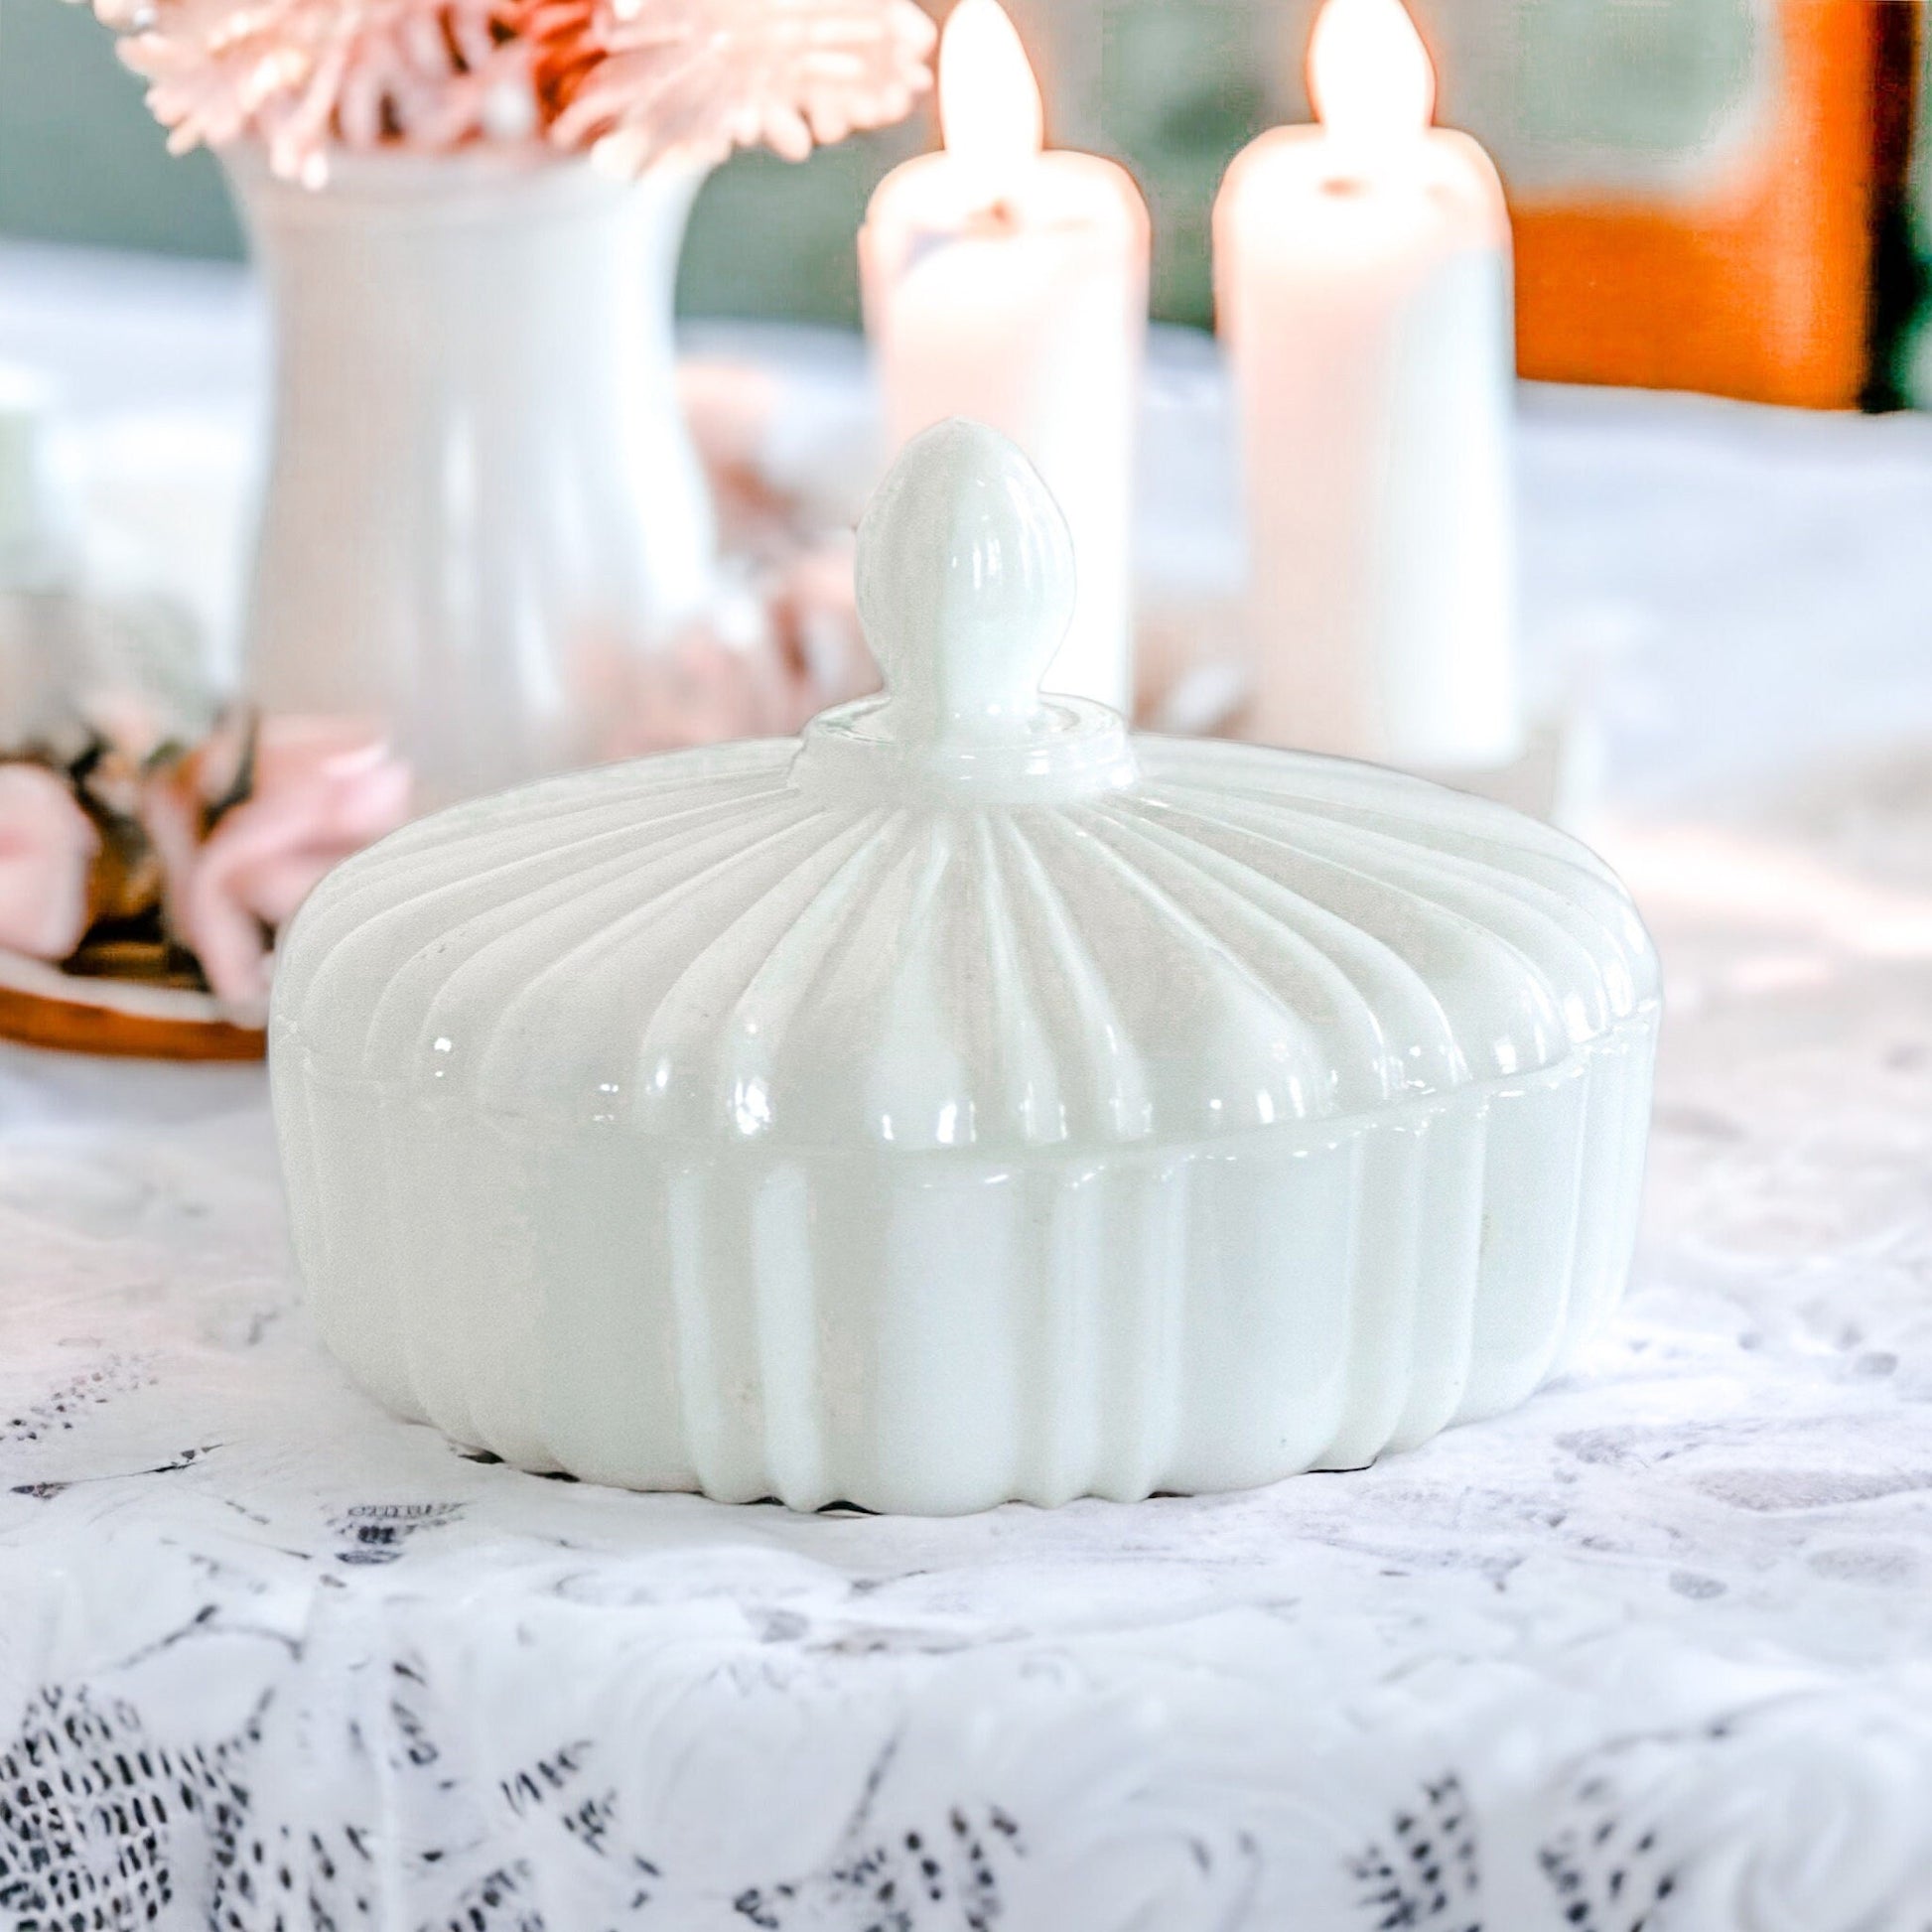 Scented Soy Candle, Vintage, Candy Dish, Unique Gifts, Farmhouse Decor